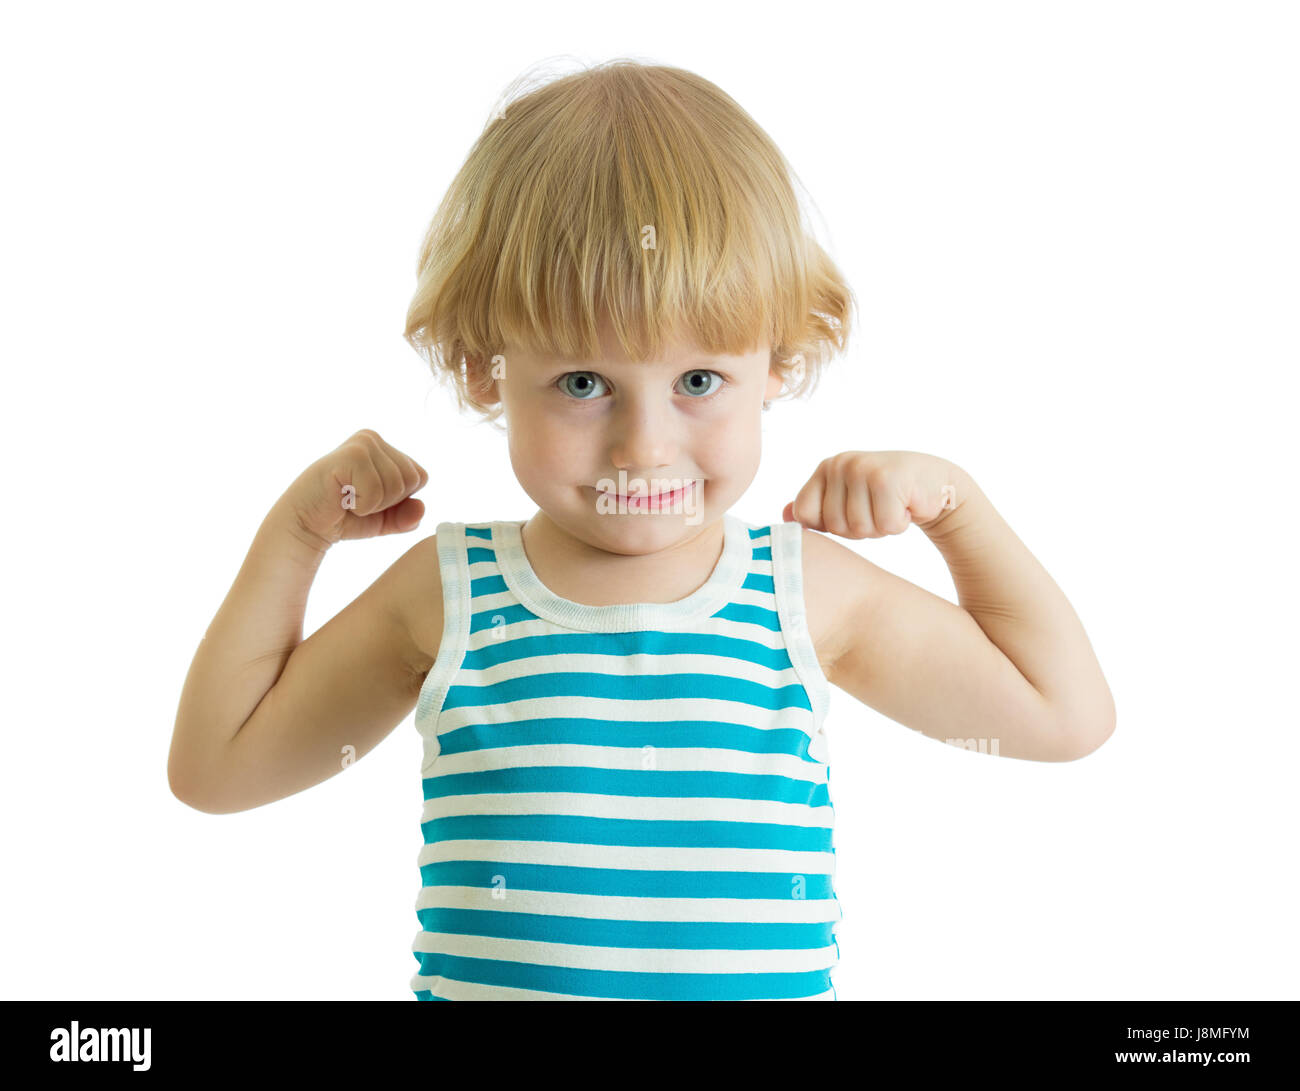 A kid showing his muscles isolated on white background Stock Photo